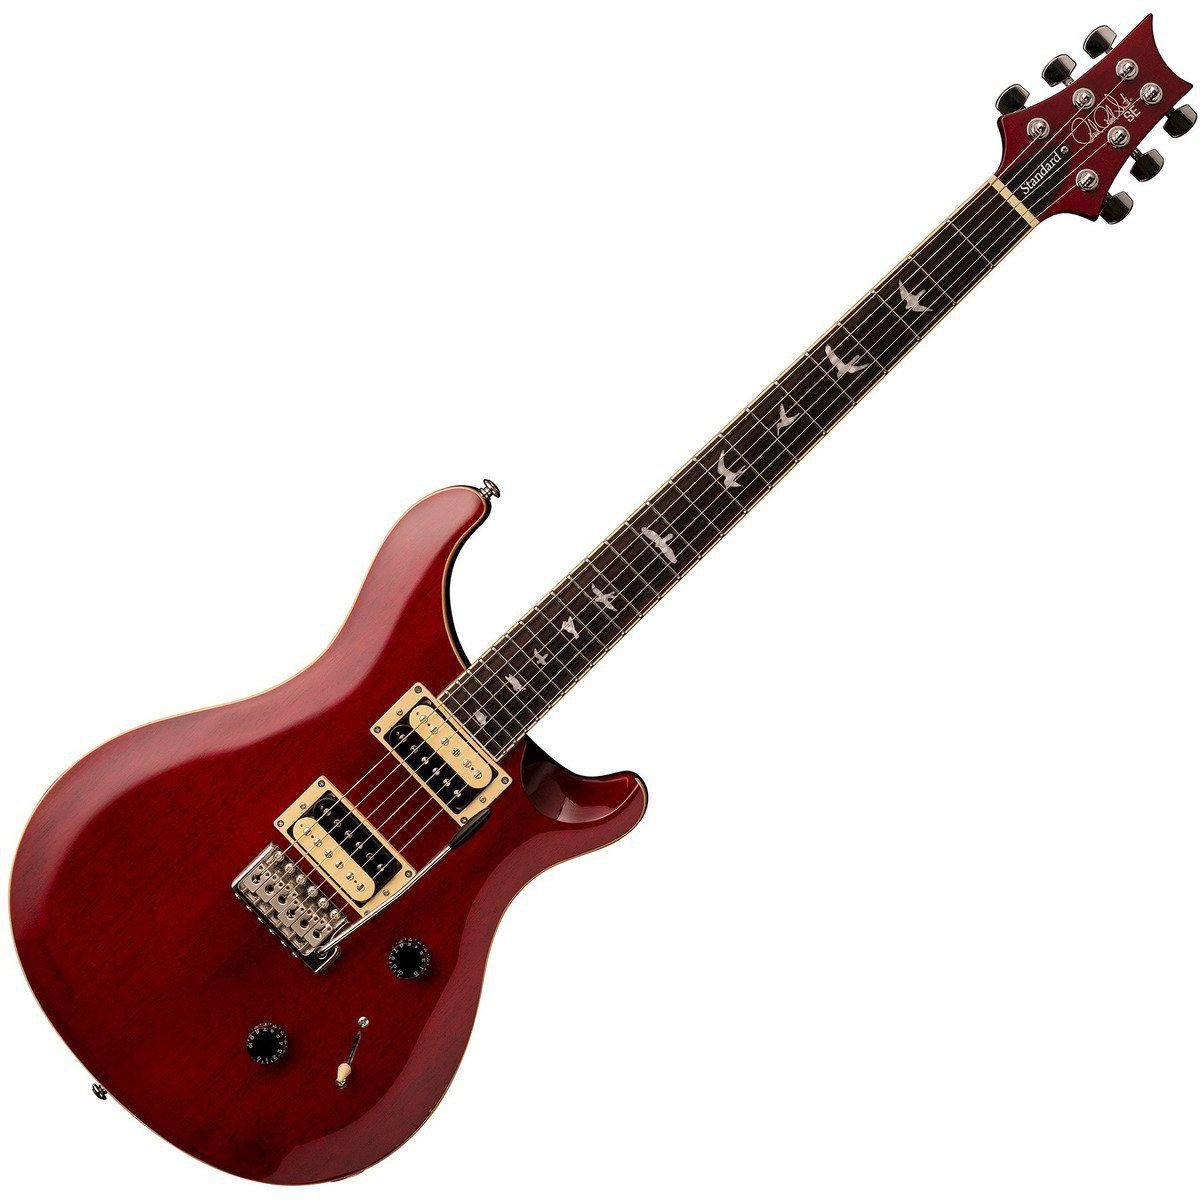 PRS ST4 SE Standard 24 Electric Guitar Trans Red -Andy's Music